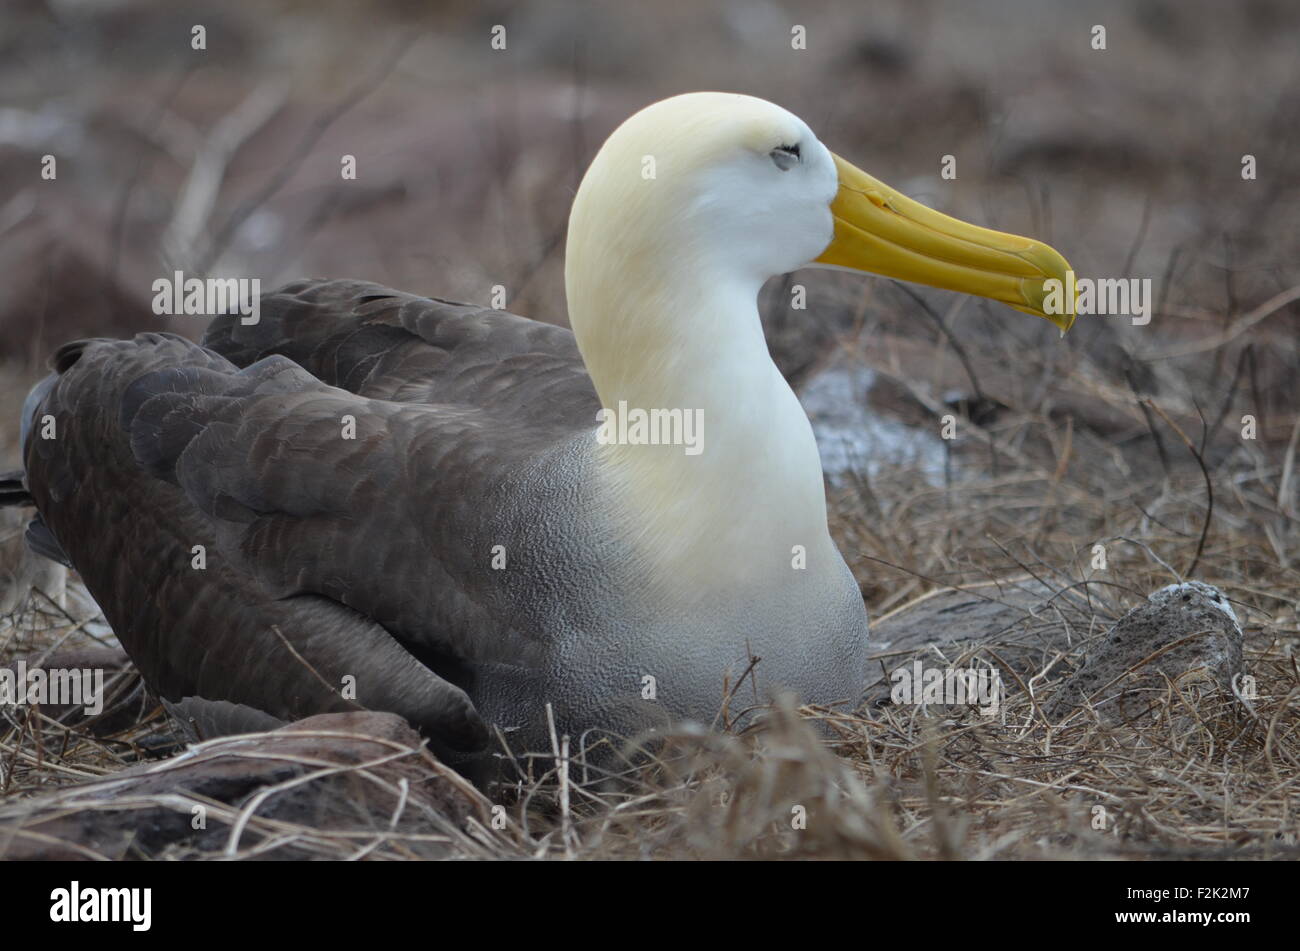 Waved Albatross (also known as Galapagos Albatross), in a nesting colony on Isla Española in the Galapagos Islands. Stock Photo